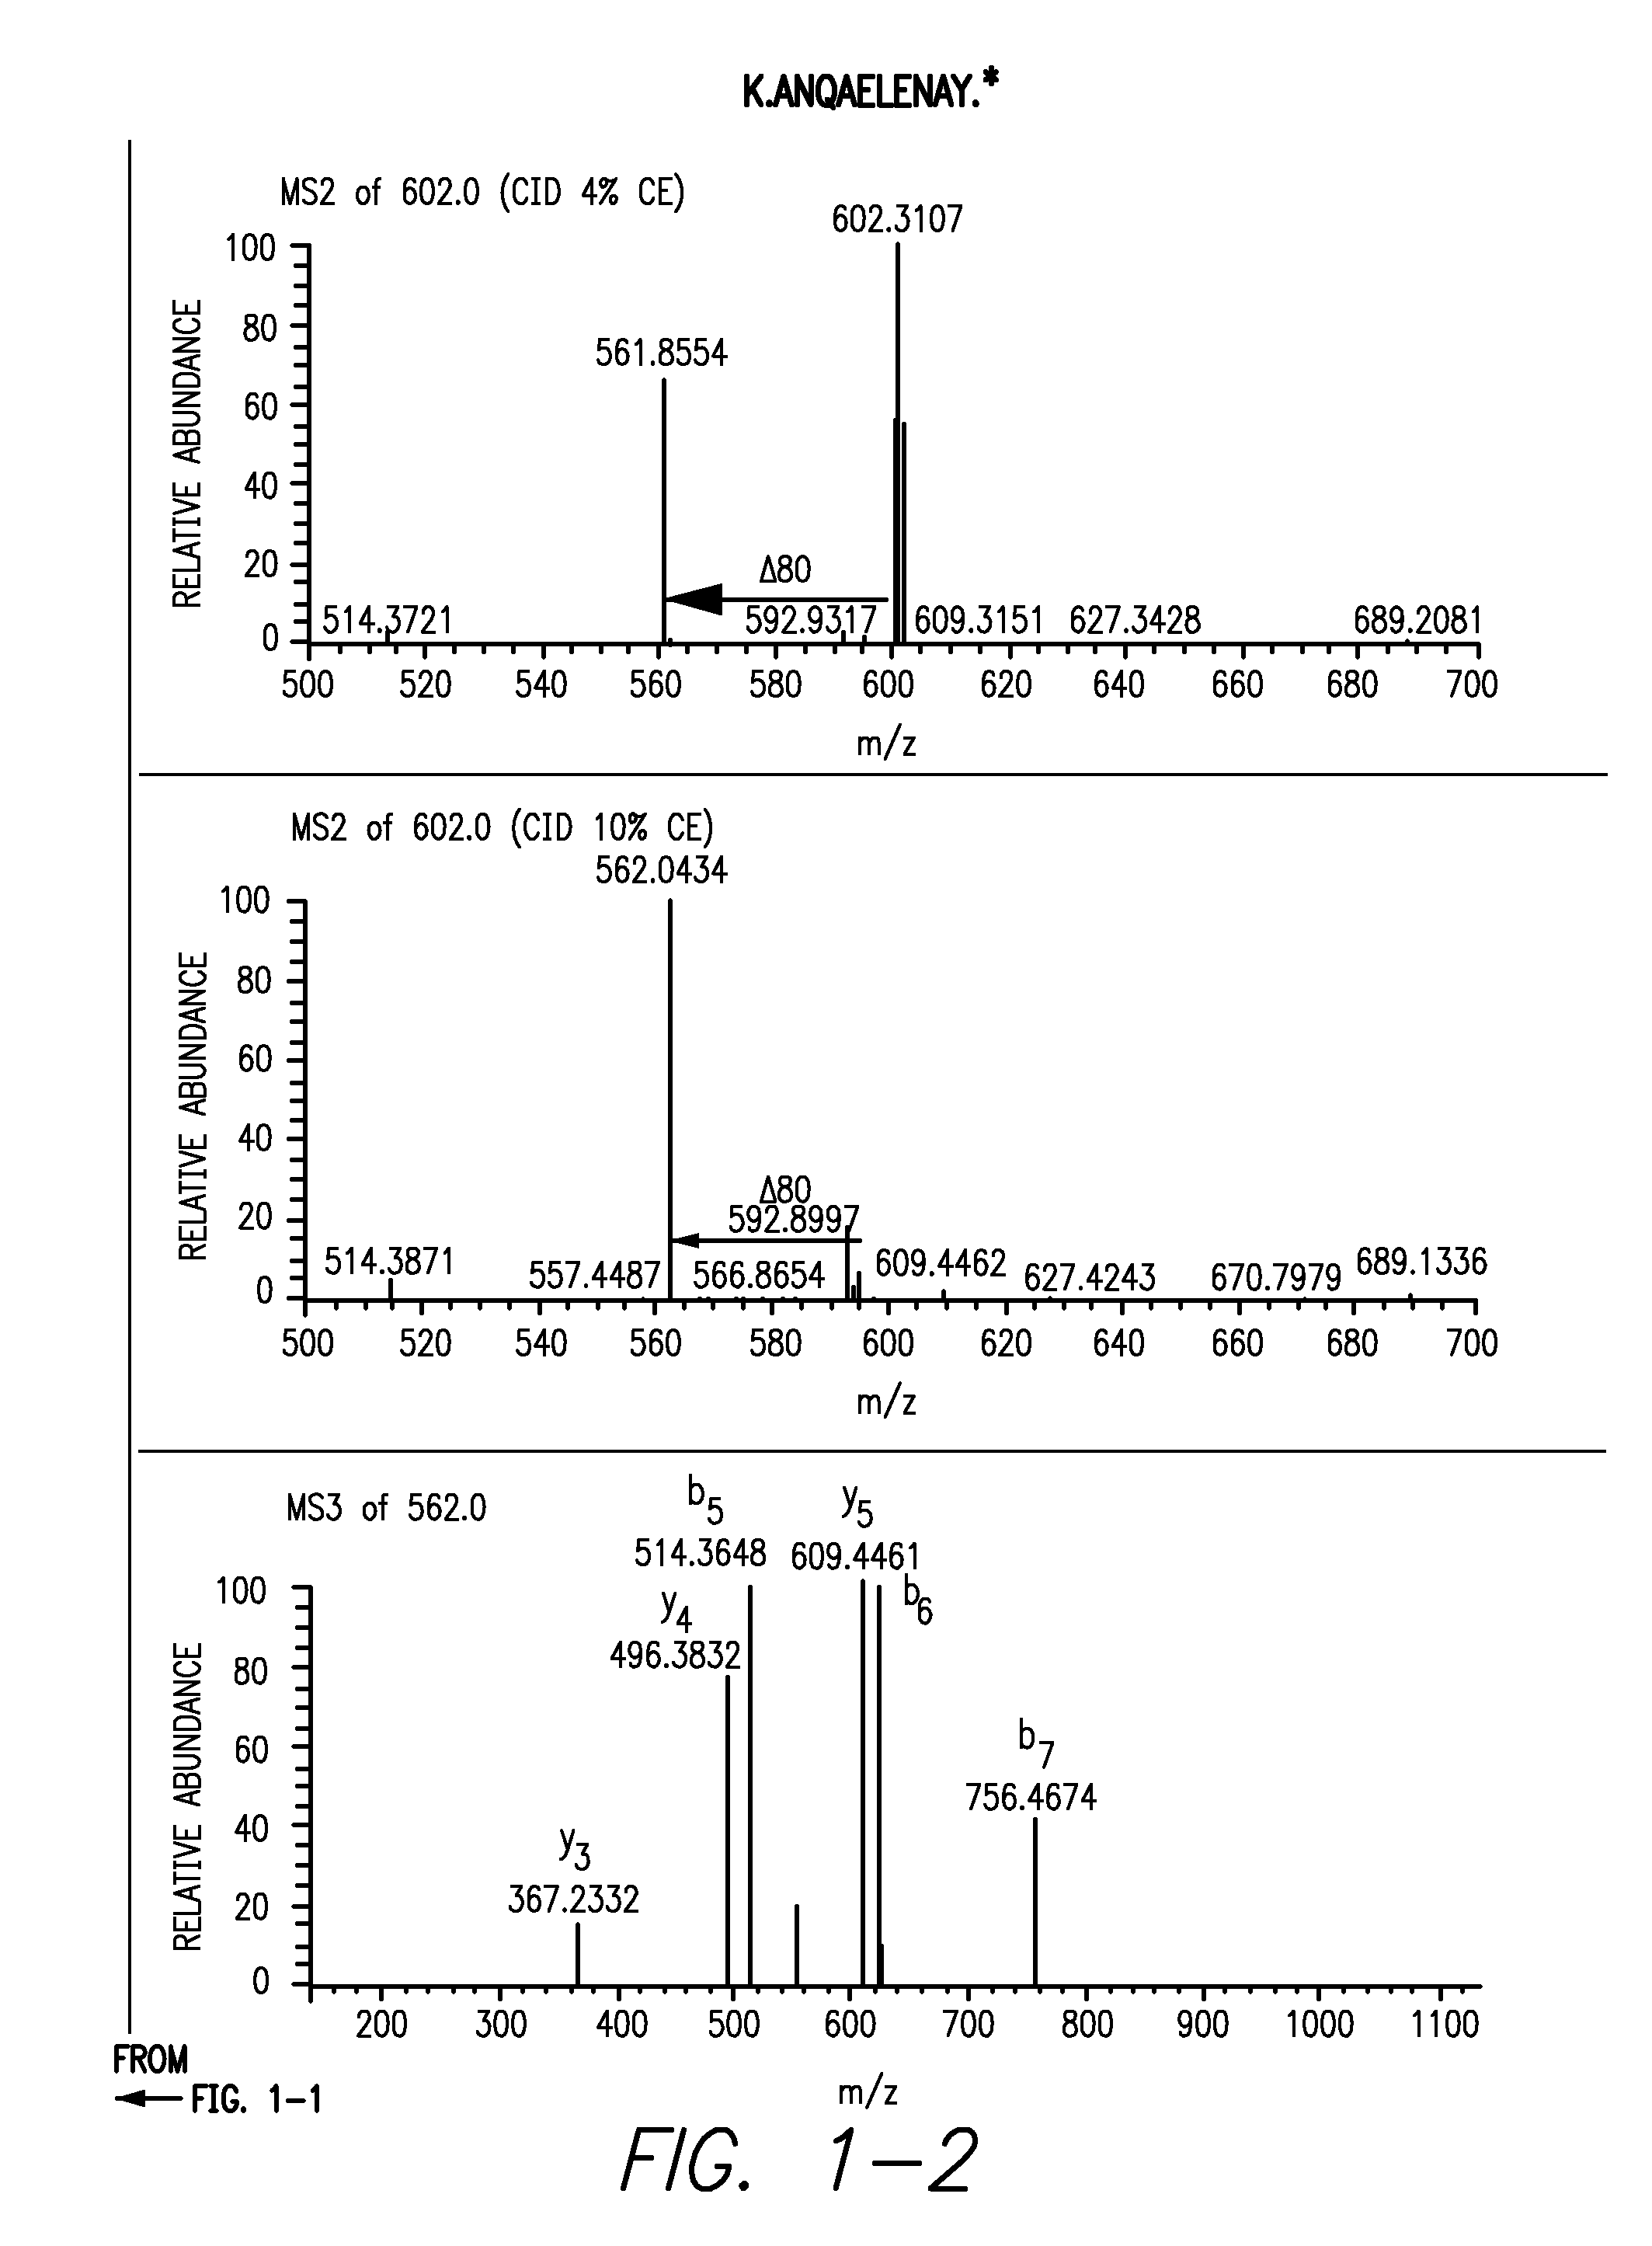 Sulfation of wnt pathway proteins